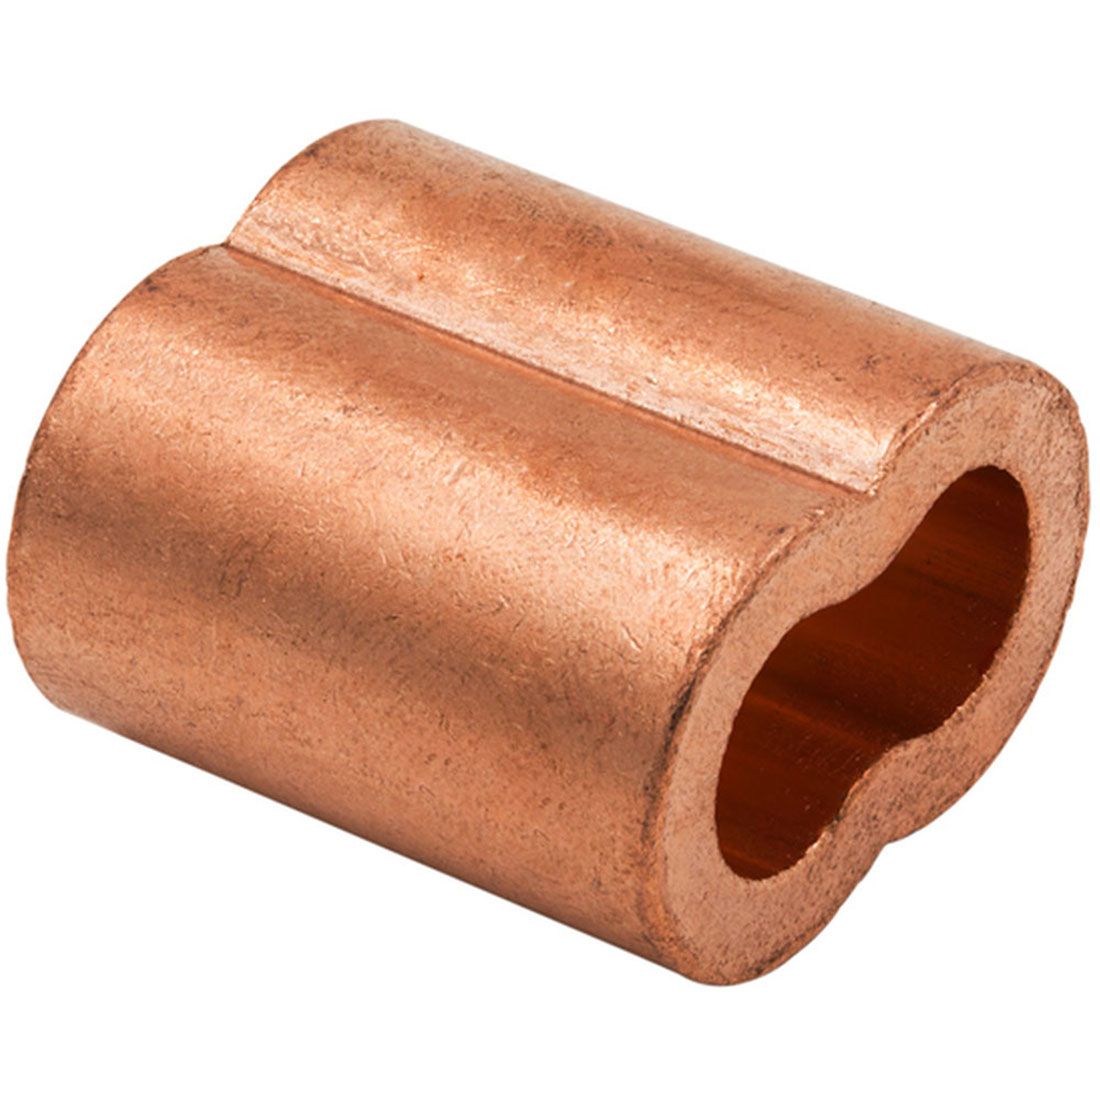 10 Copper Swage Sleeves for Wire Rope Made in USA Size 3/16" 